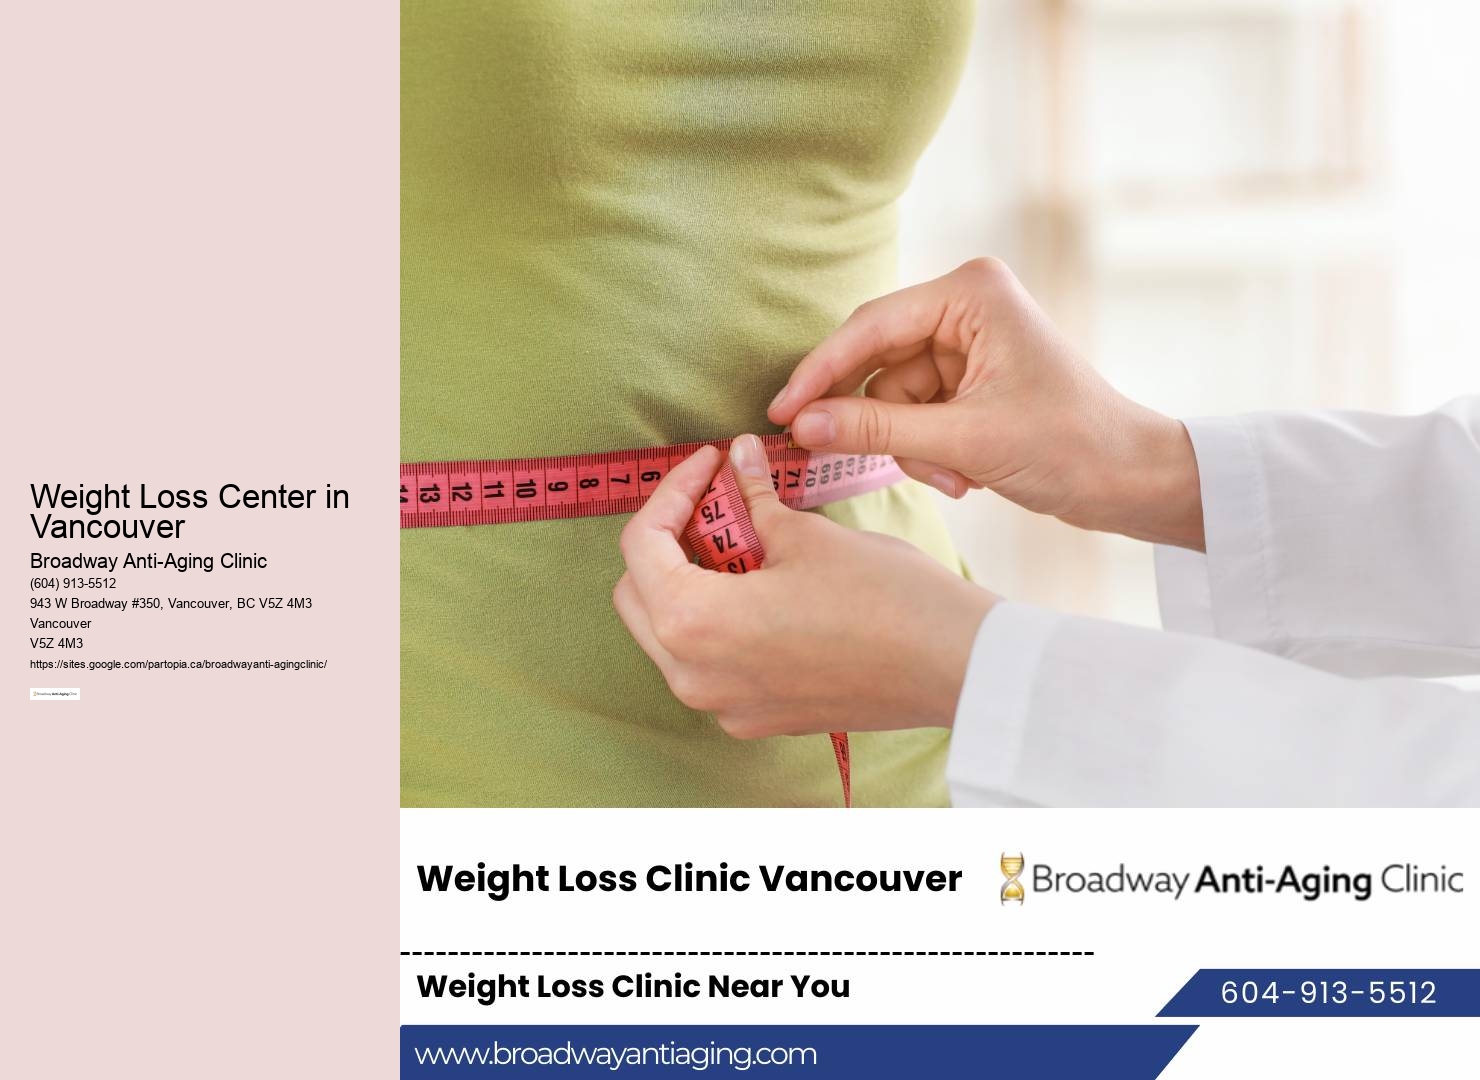 Budget-friendly Medical Weight Loss Clinic Prices